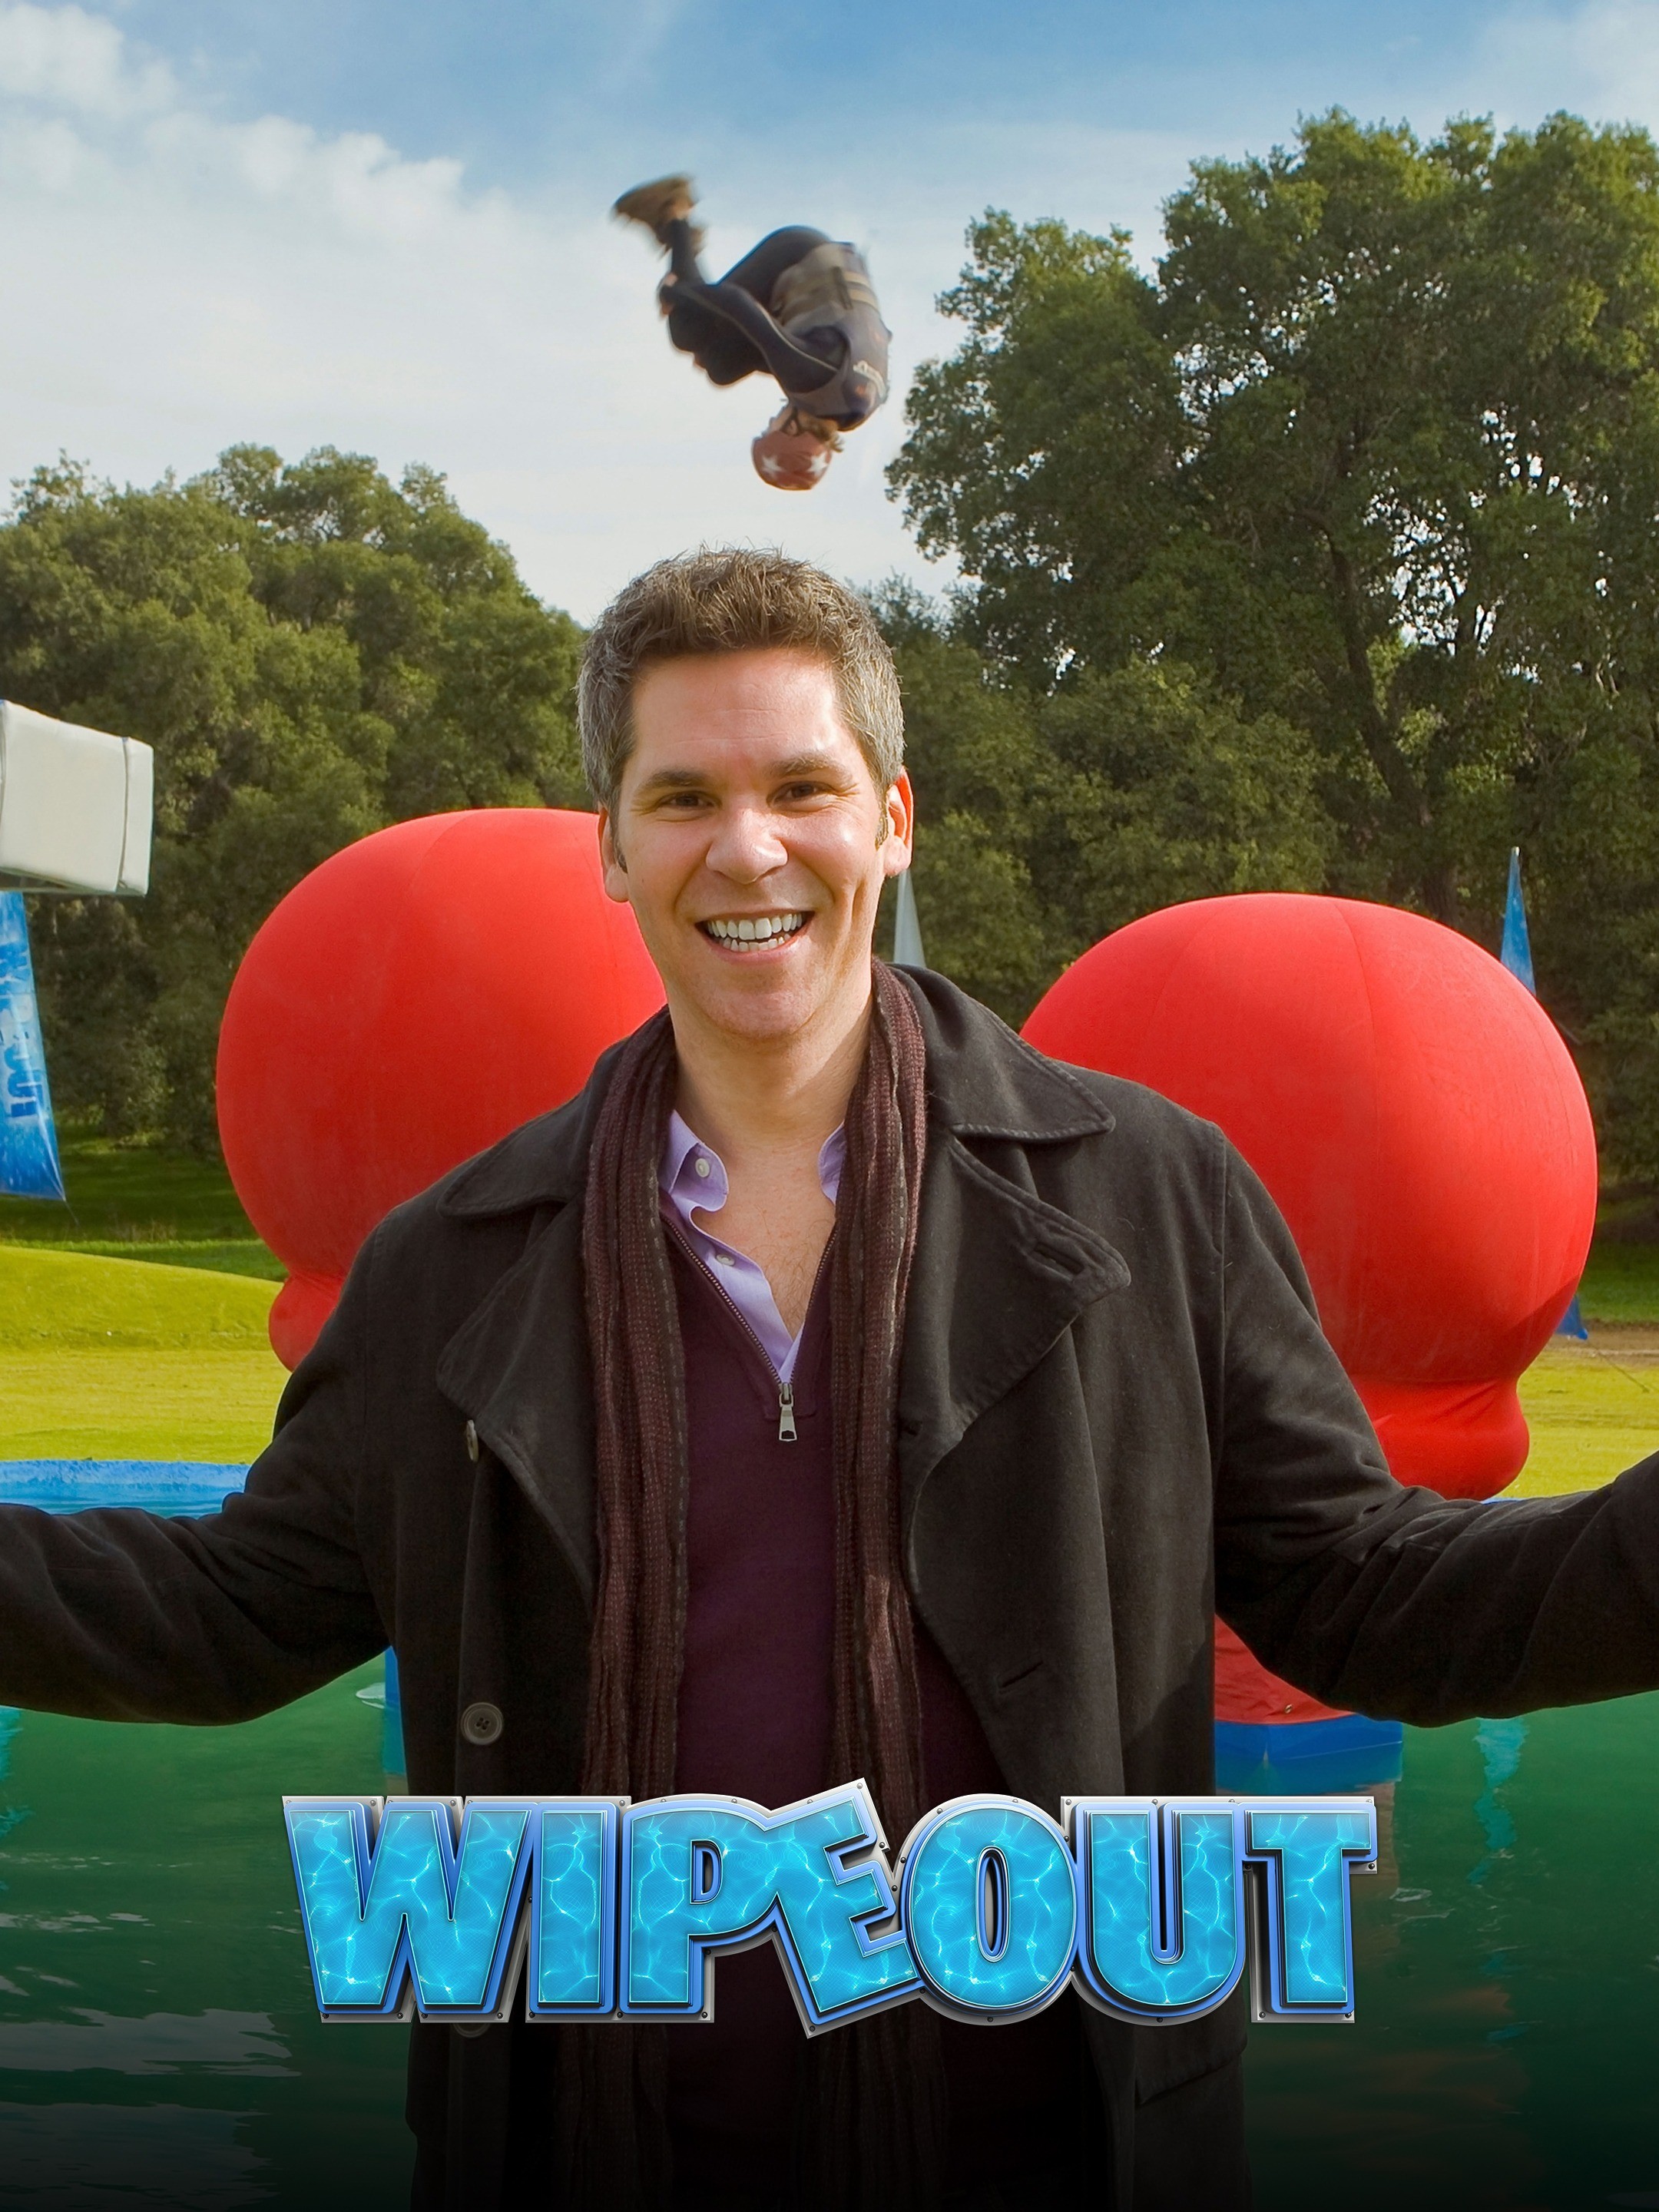 What Is 'Wipeout' On Netflix, And Has Anyone Died On The Show?